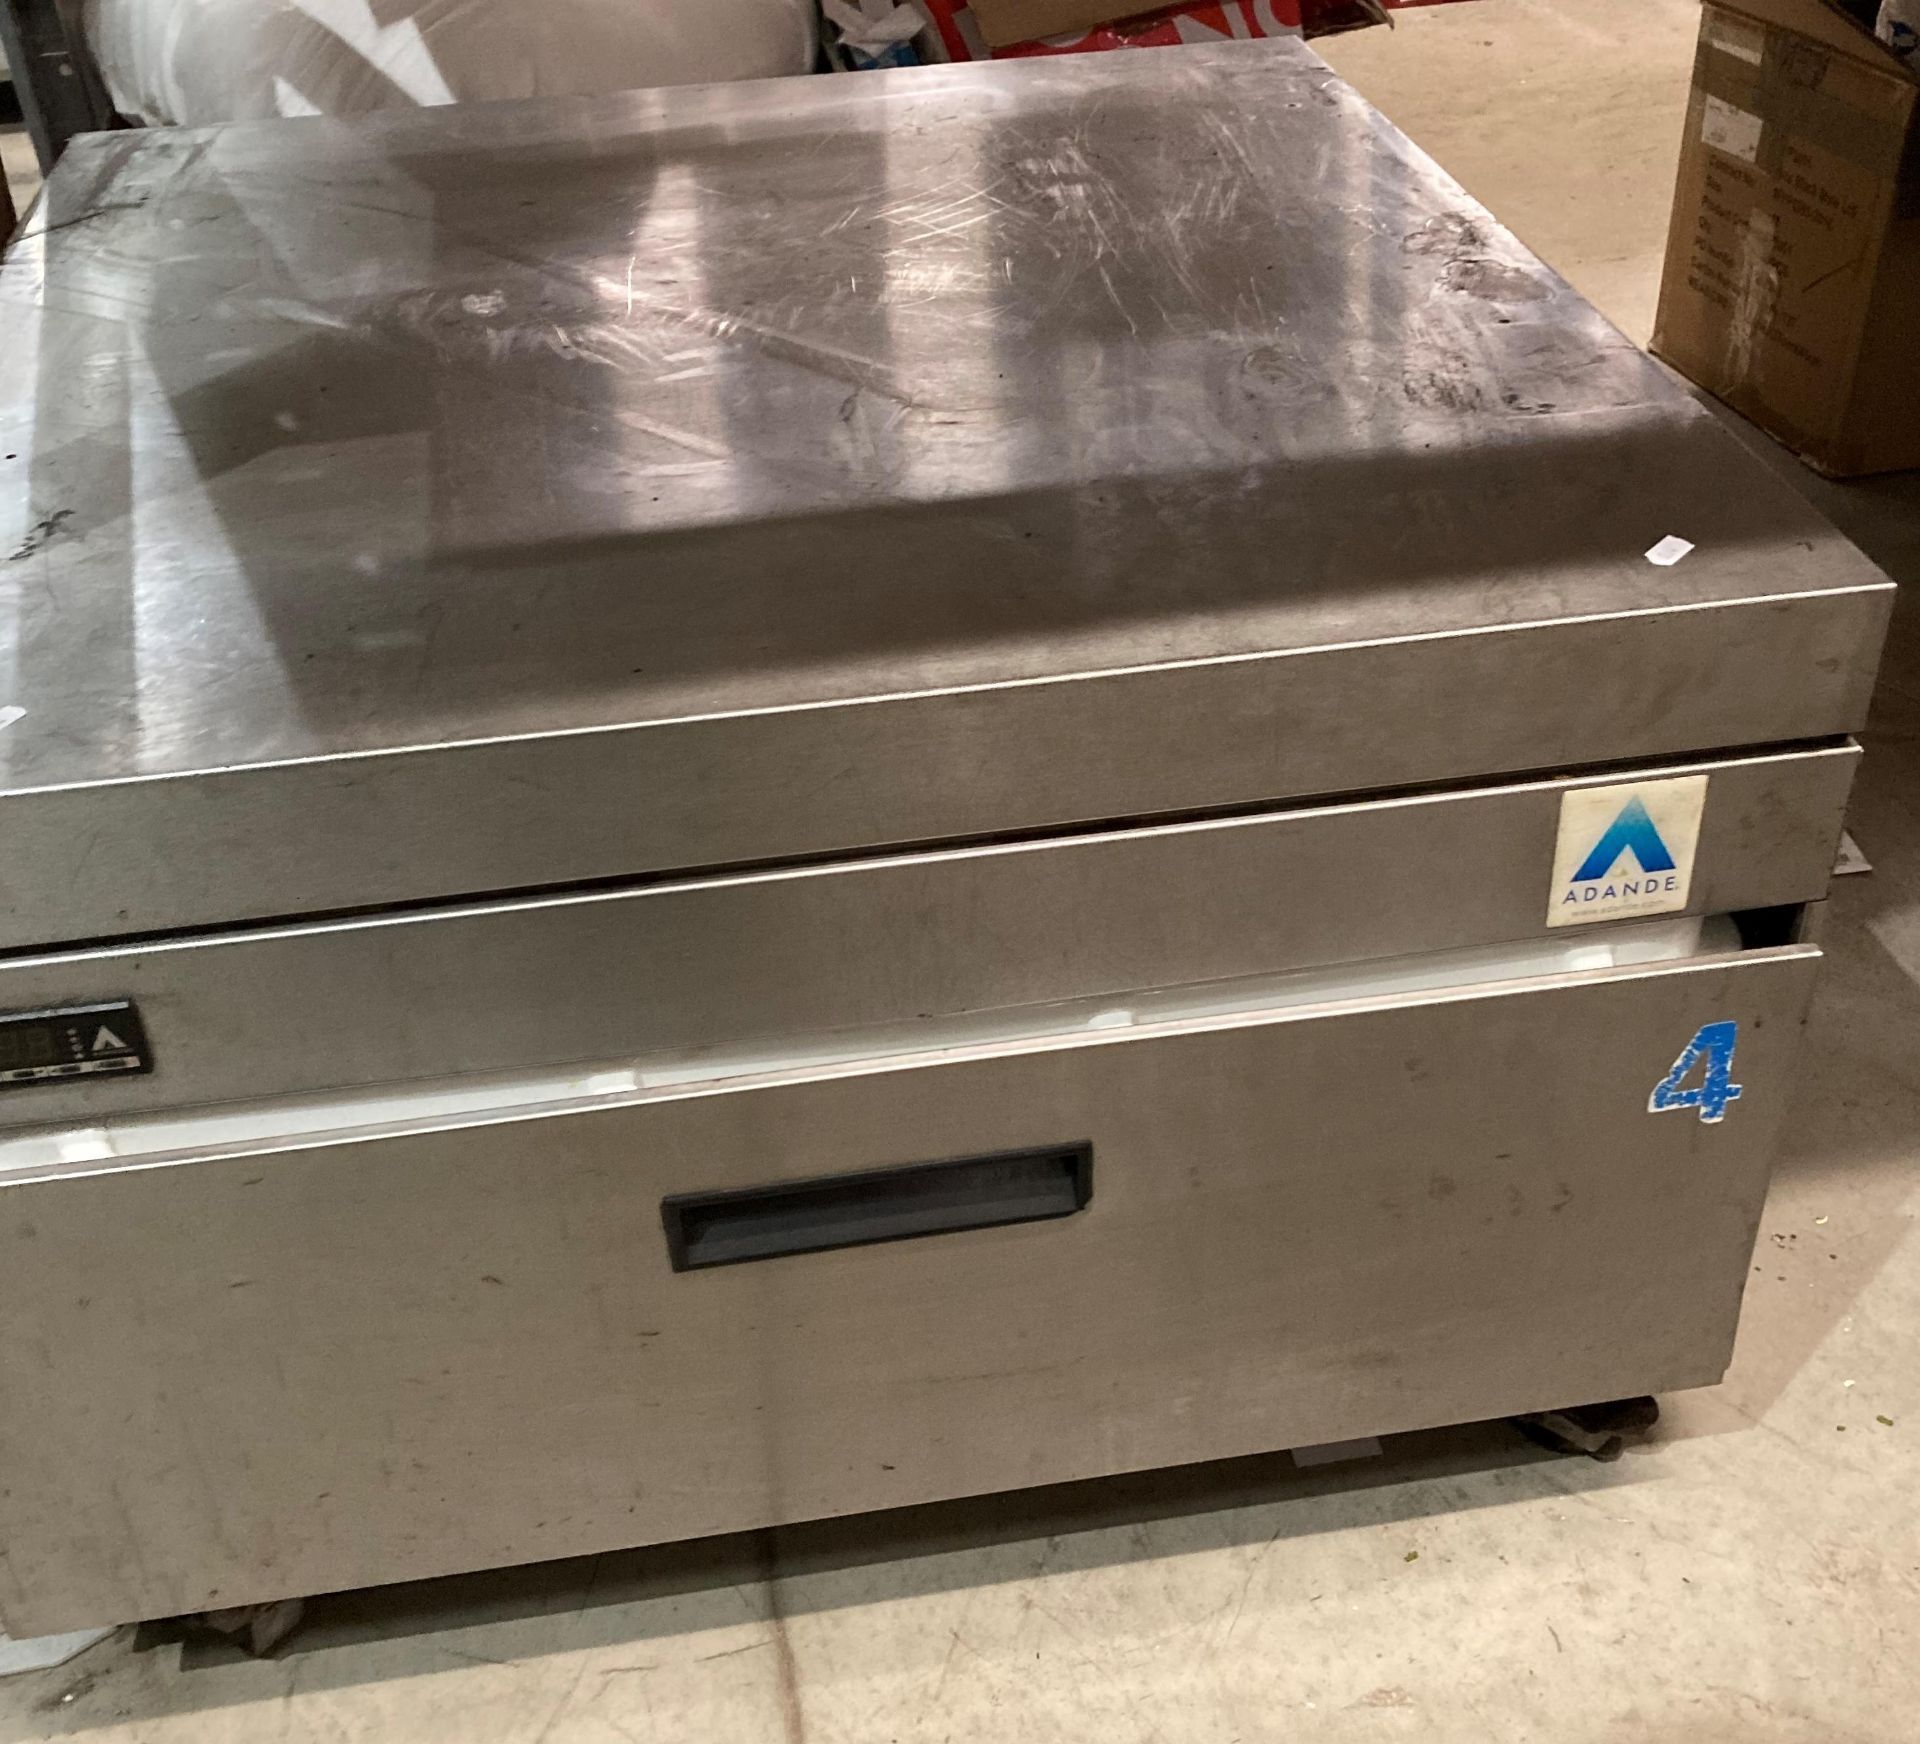 Adande stainless steel mobile refrigerated drawer (as seen - failed insulation test and current